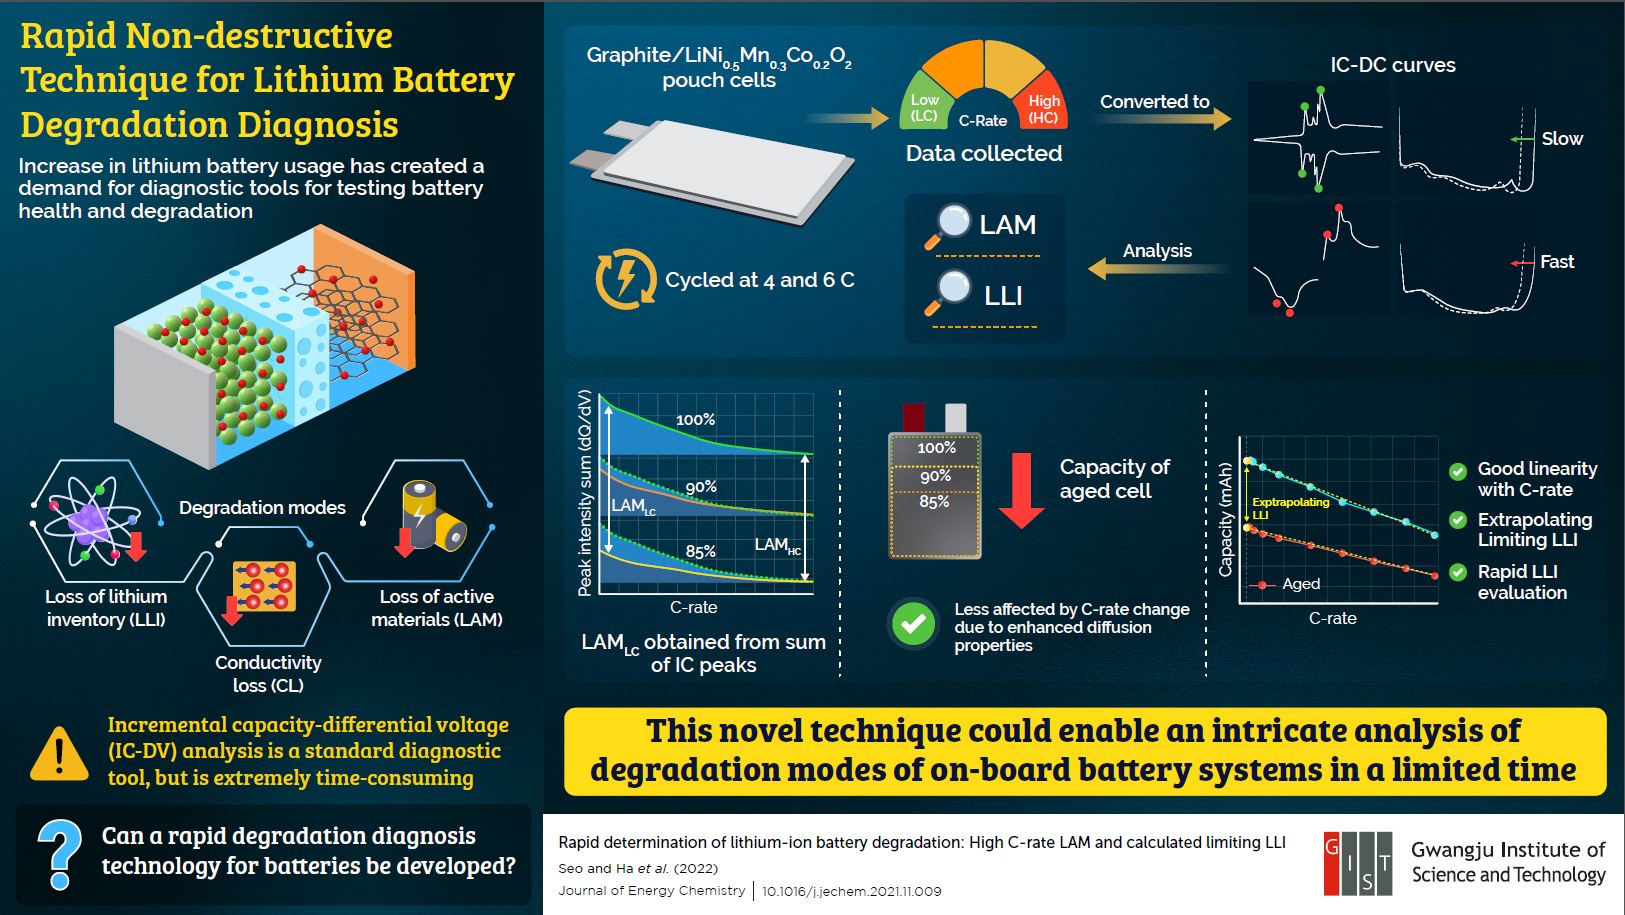 Scientists at the Gwangju Institute of Science and Technology Propose a Non-invasive Approach to Estimating Lithium-ion Battery Degradation 이미지